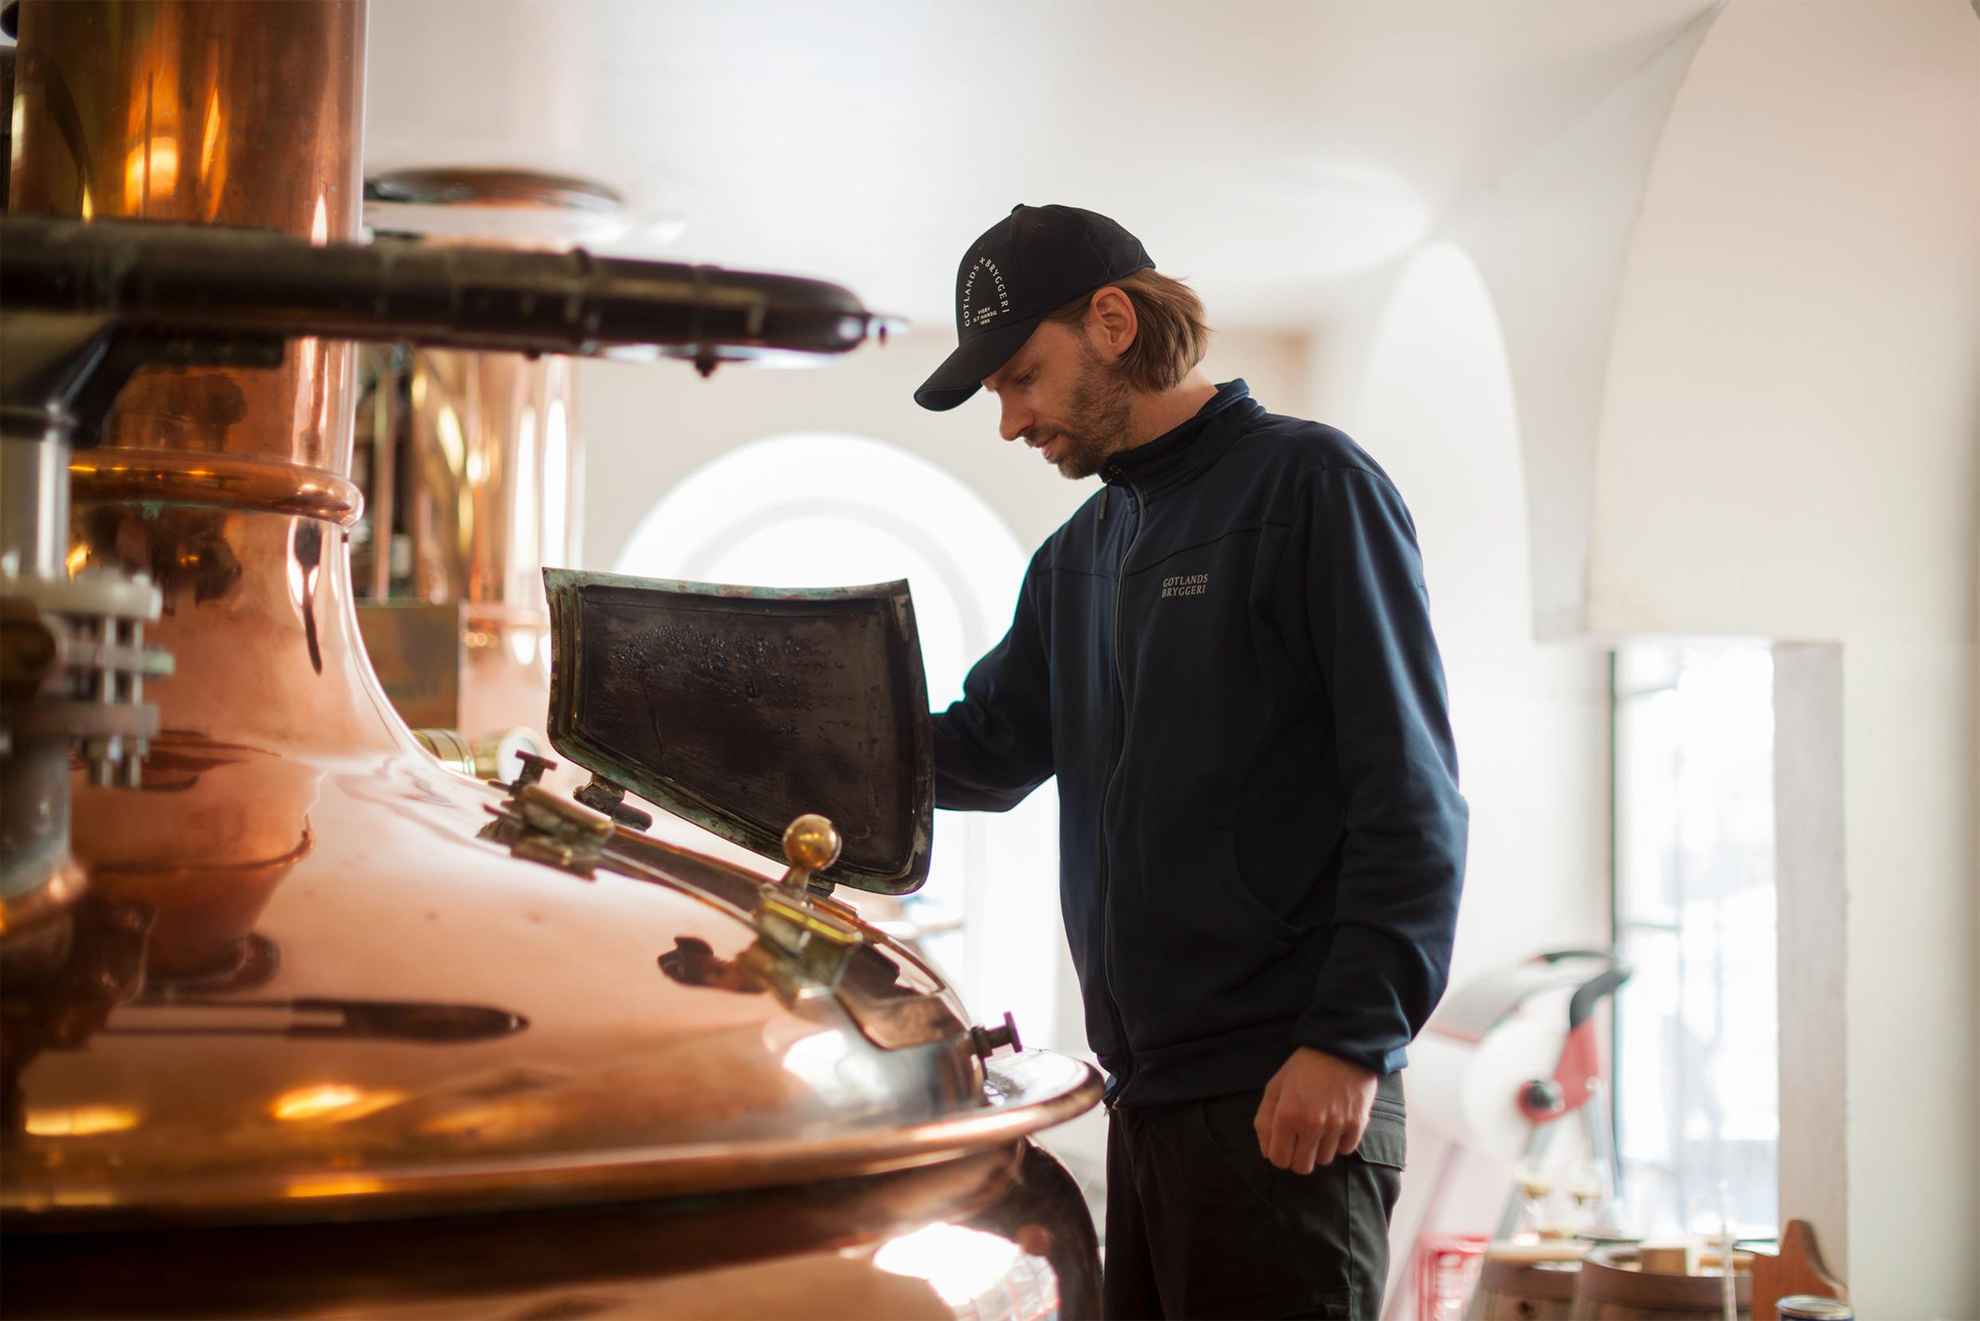 An employee at Gotlands Bryggeri is looking inside a copper boiler at the brewery.